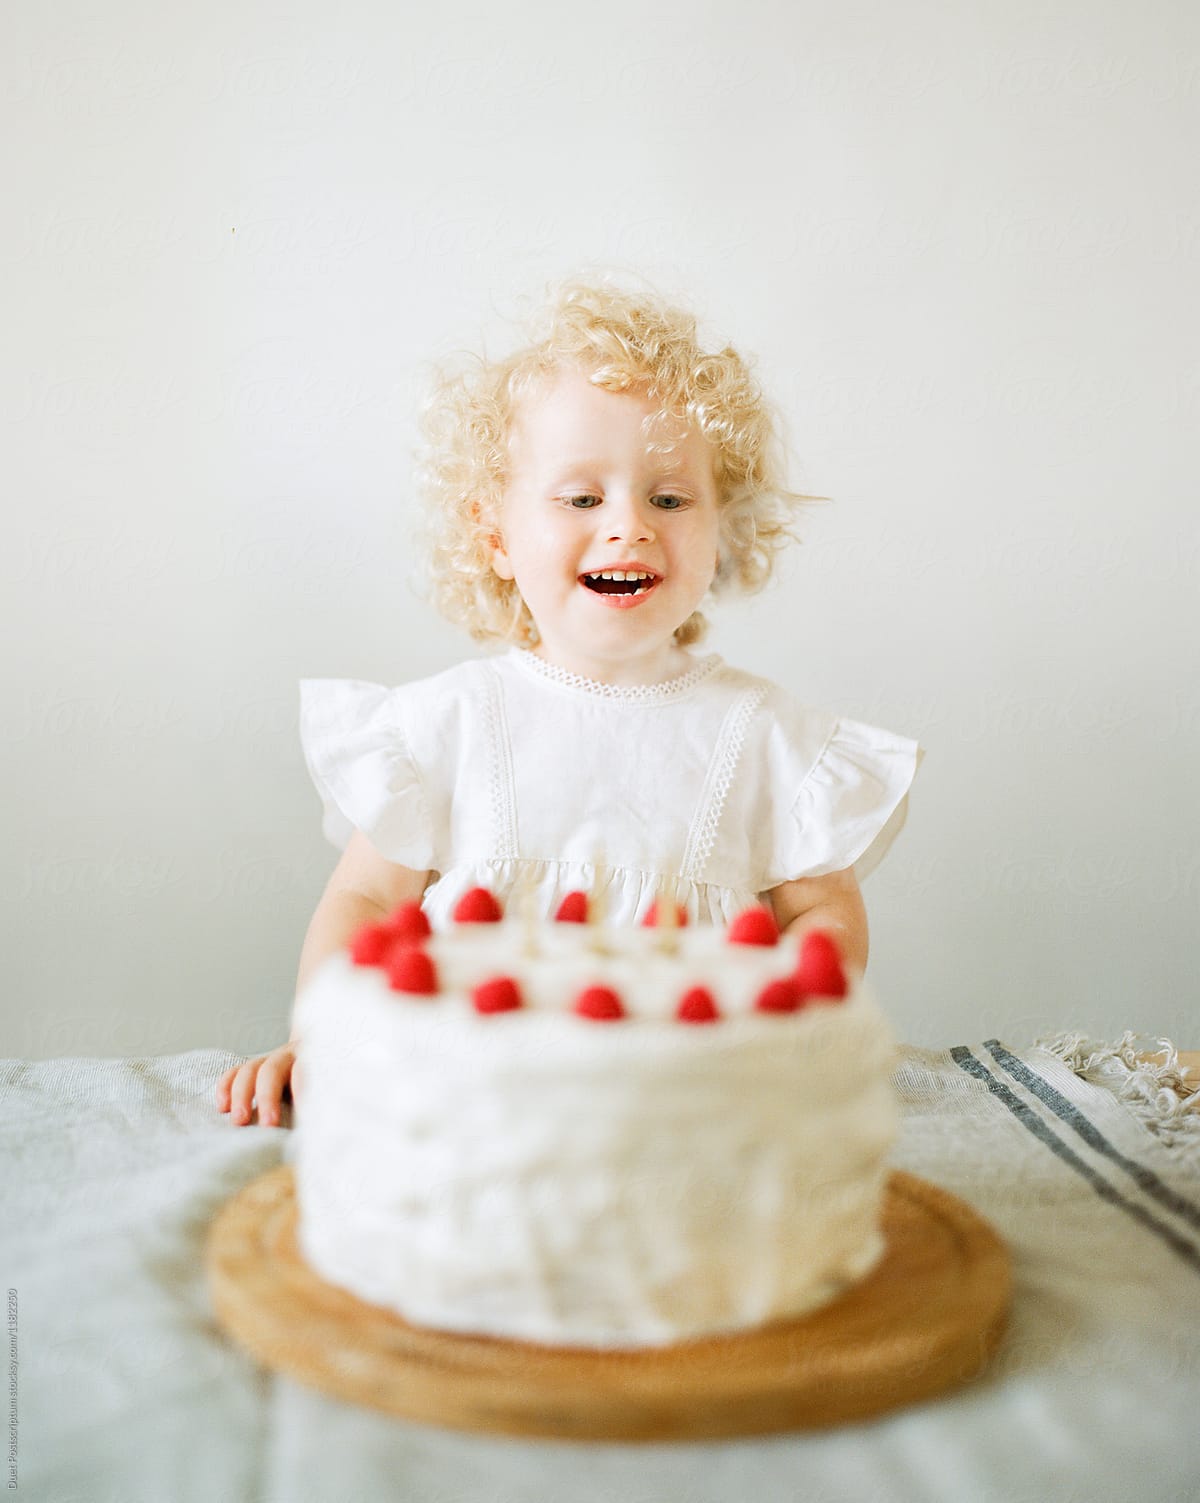 A kid looking at her birthday cake